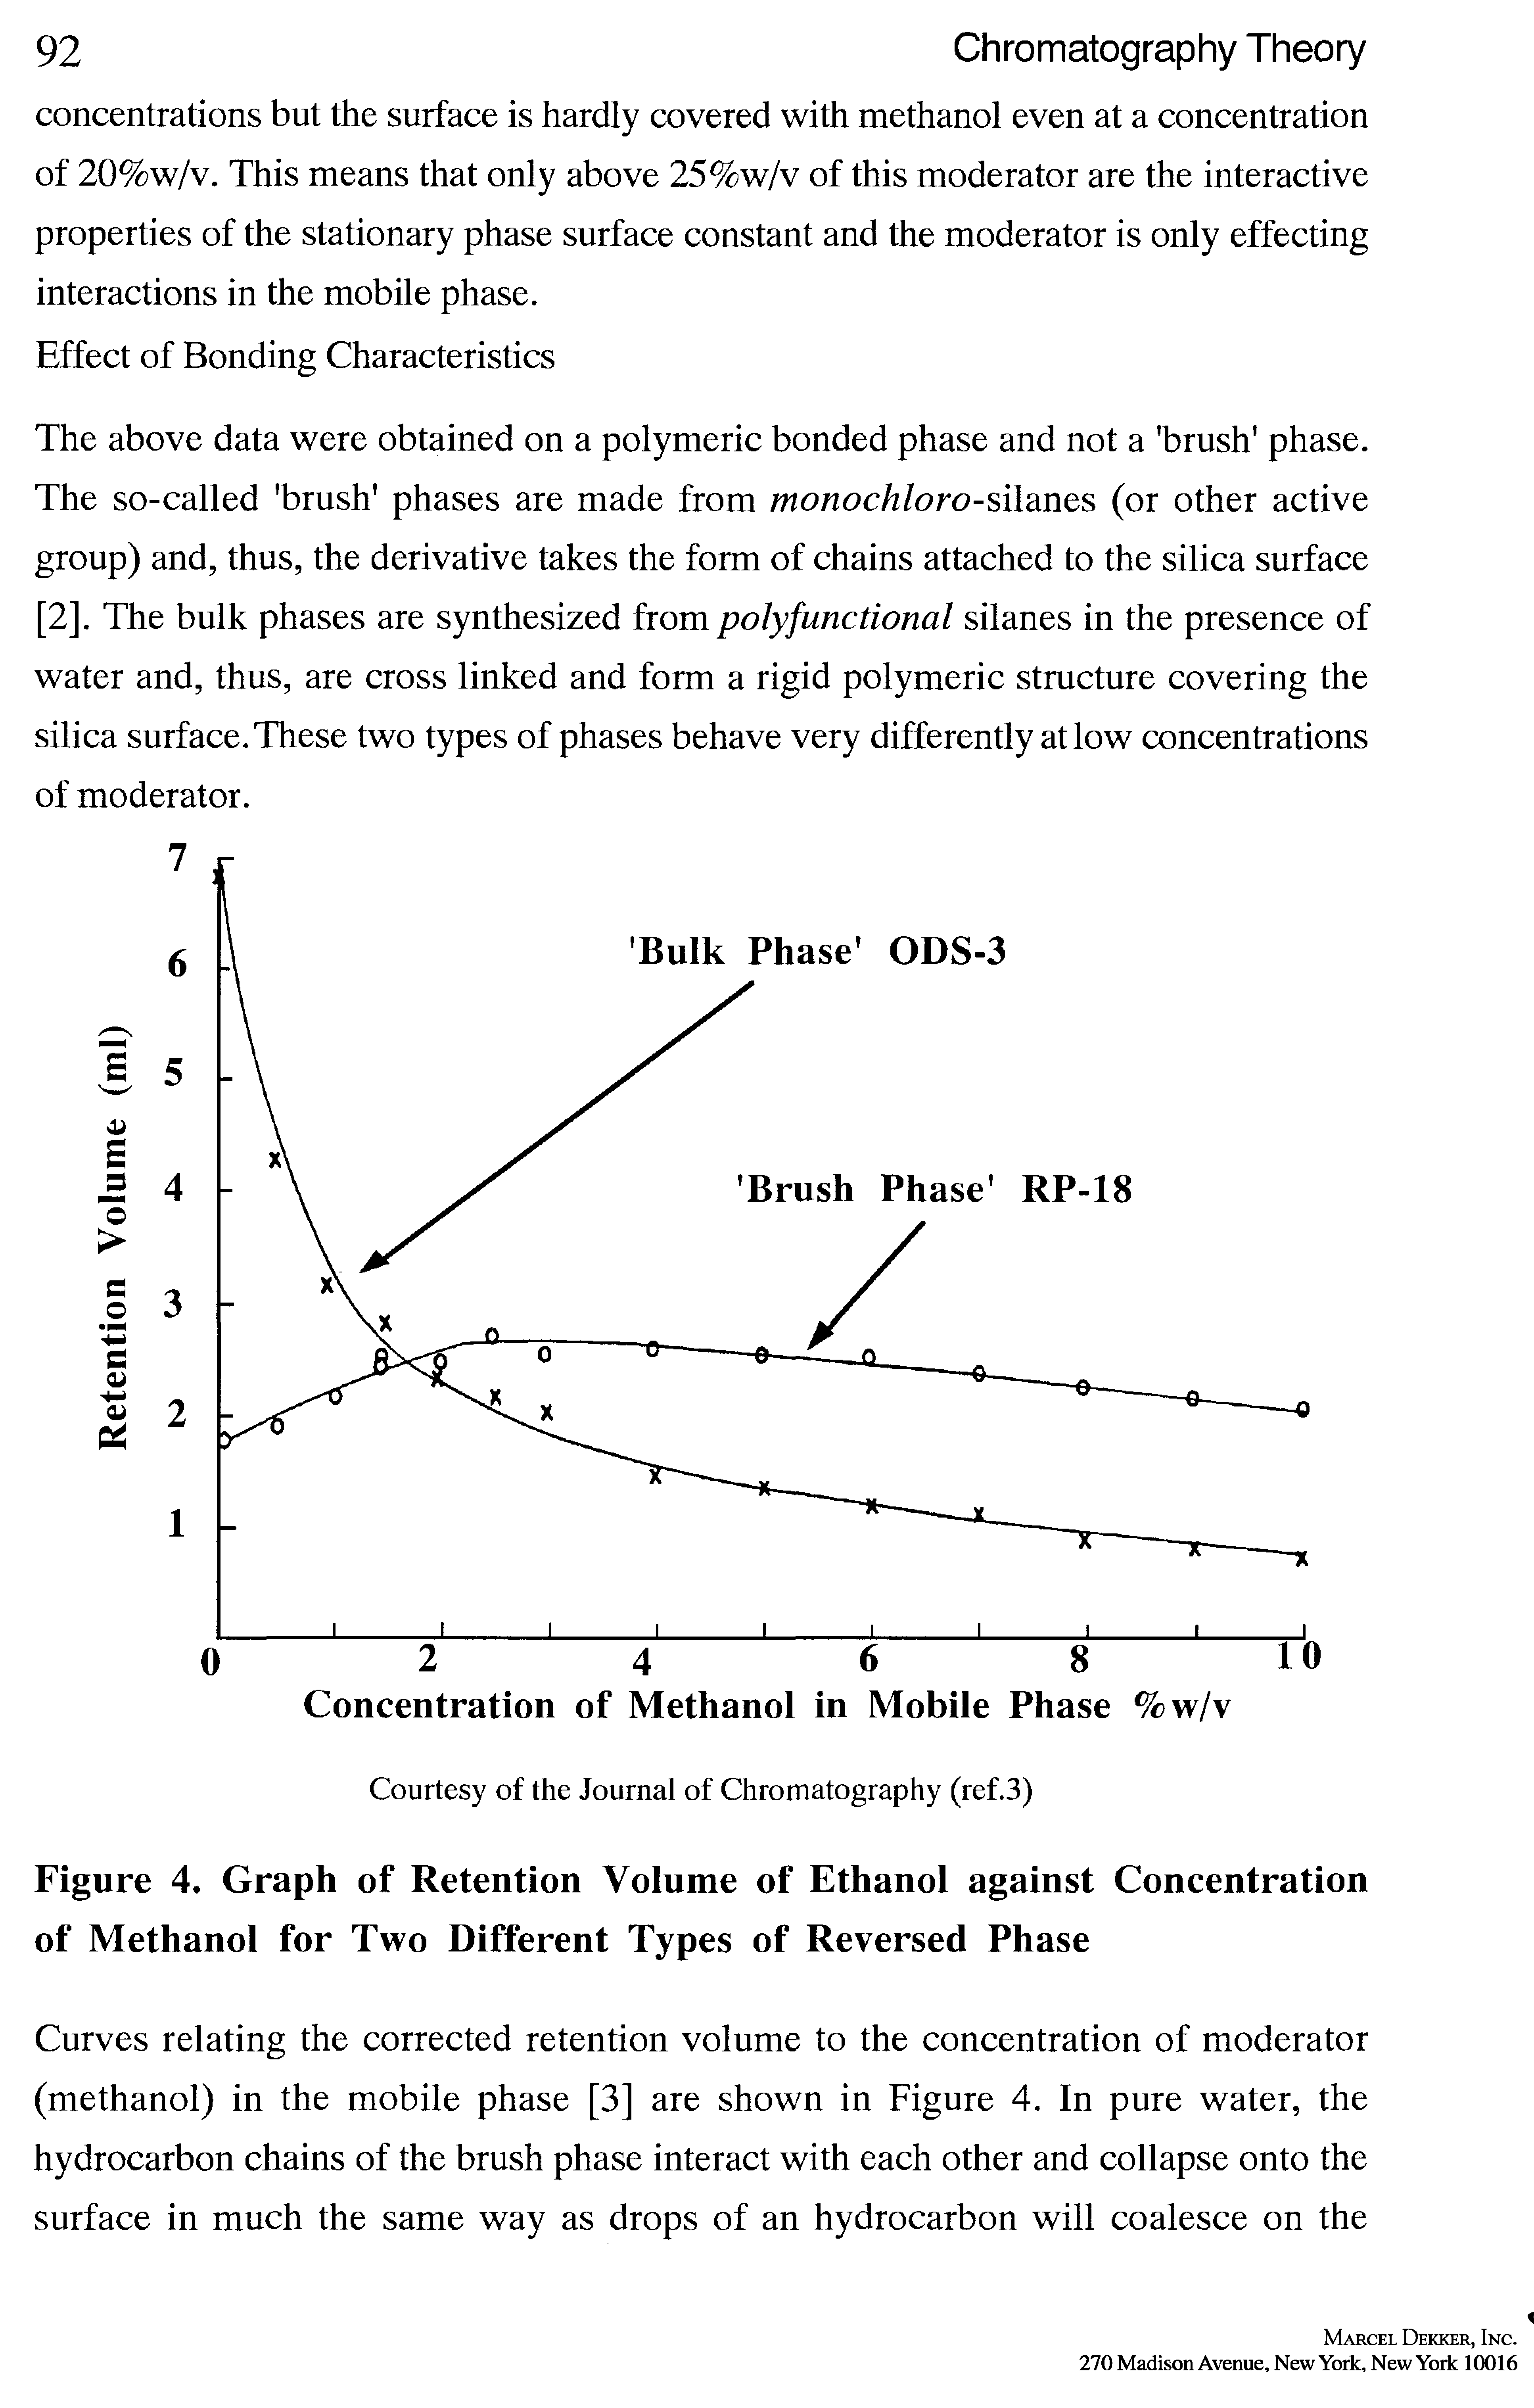 Figure 4. Graph of Retention Volume of Ethanol against Concentration of Methanol for Two Different Types of Reversed Phase...